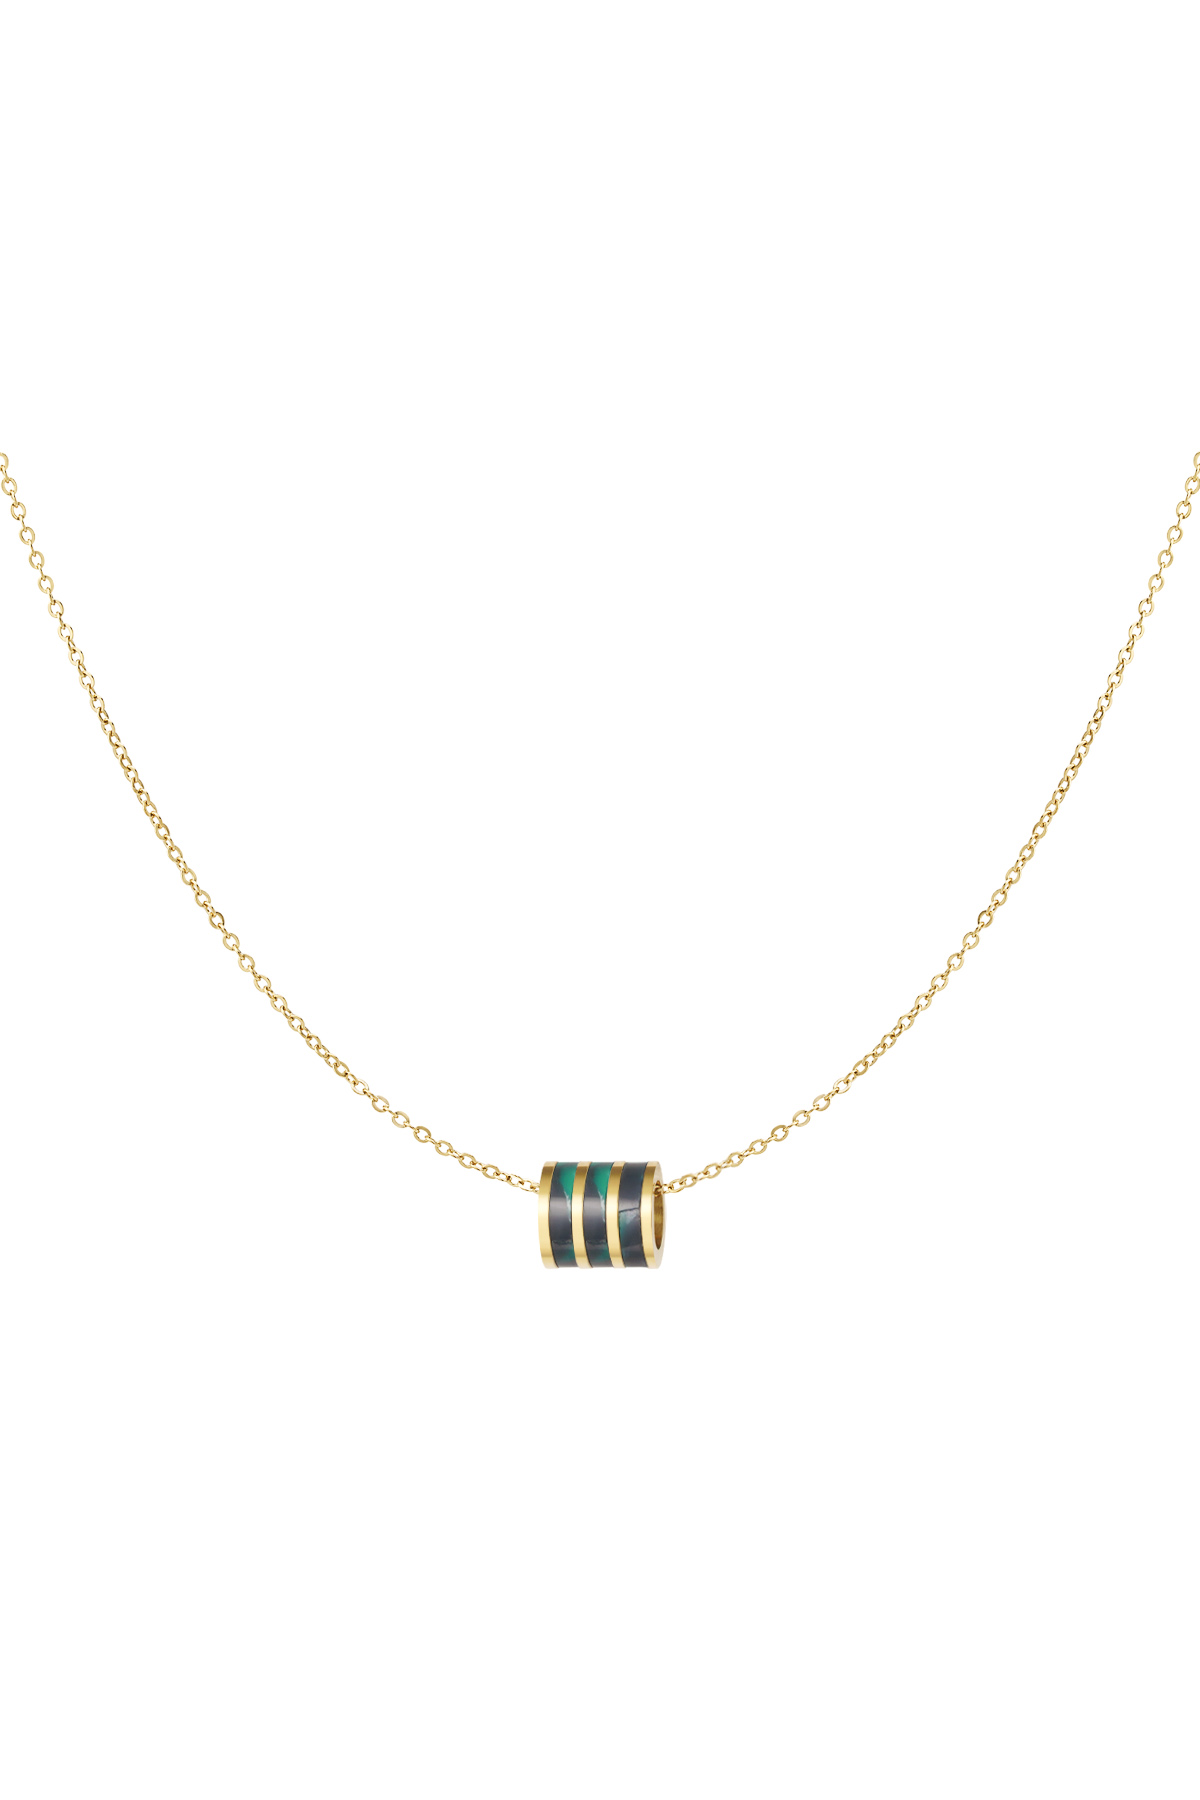 Necklace round charm - gold/green